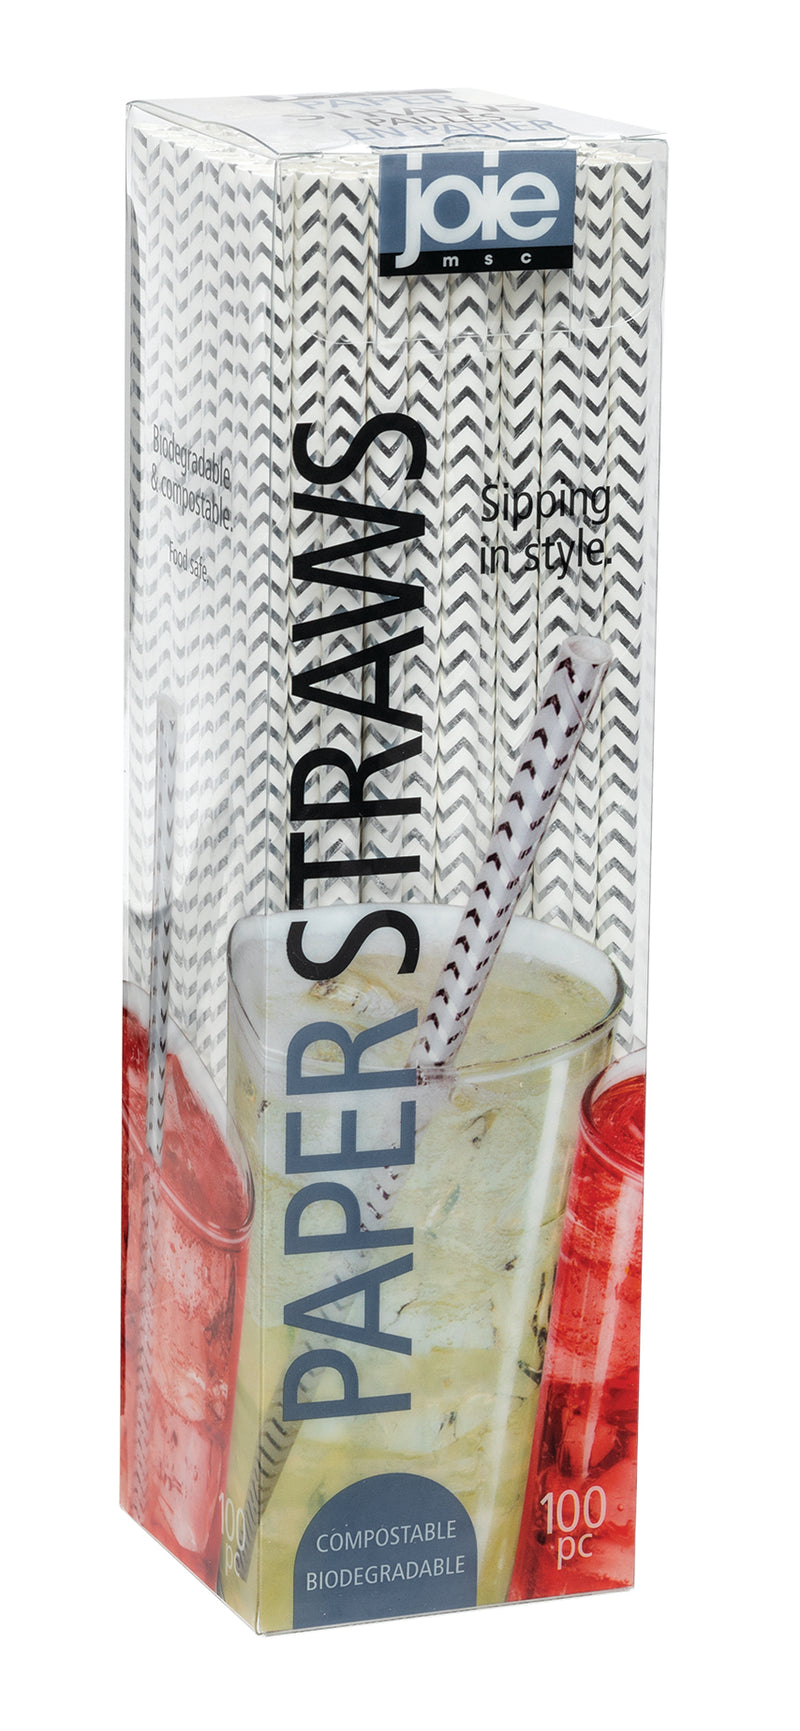 products/12659_PaperStraws_Package.jpg